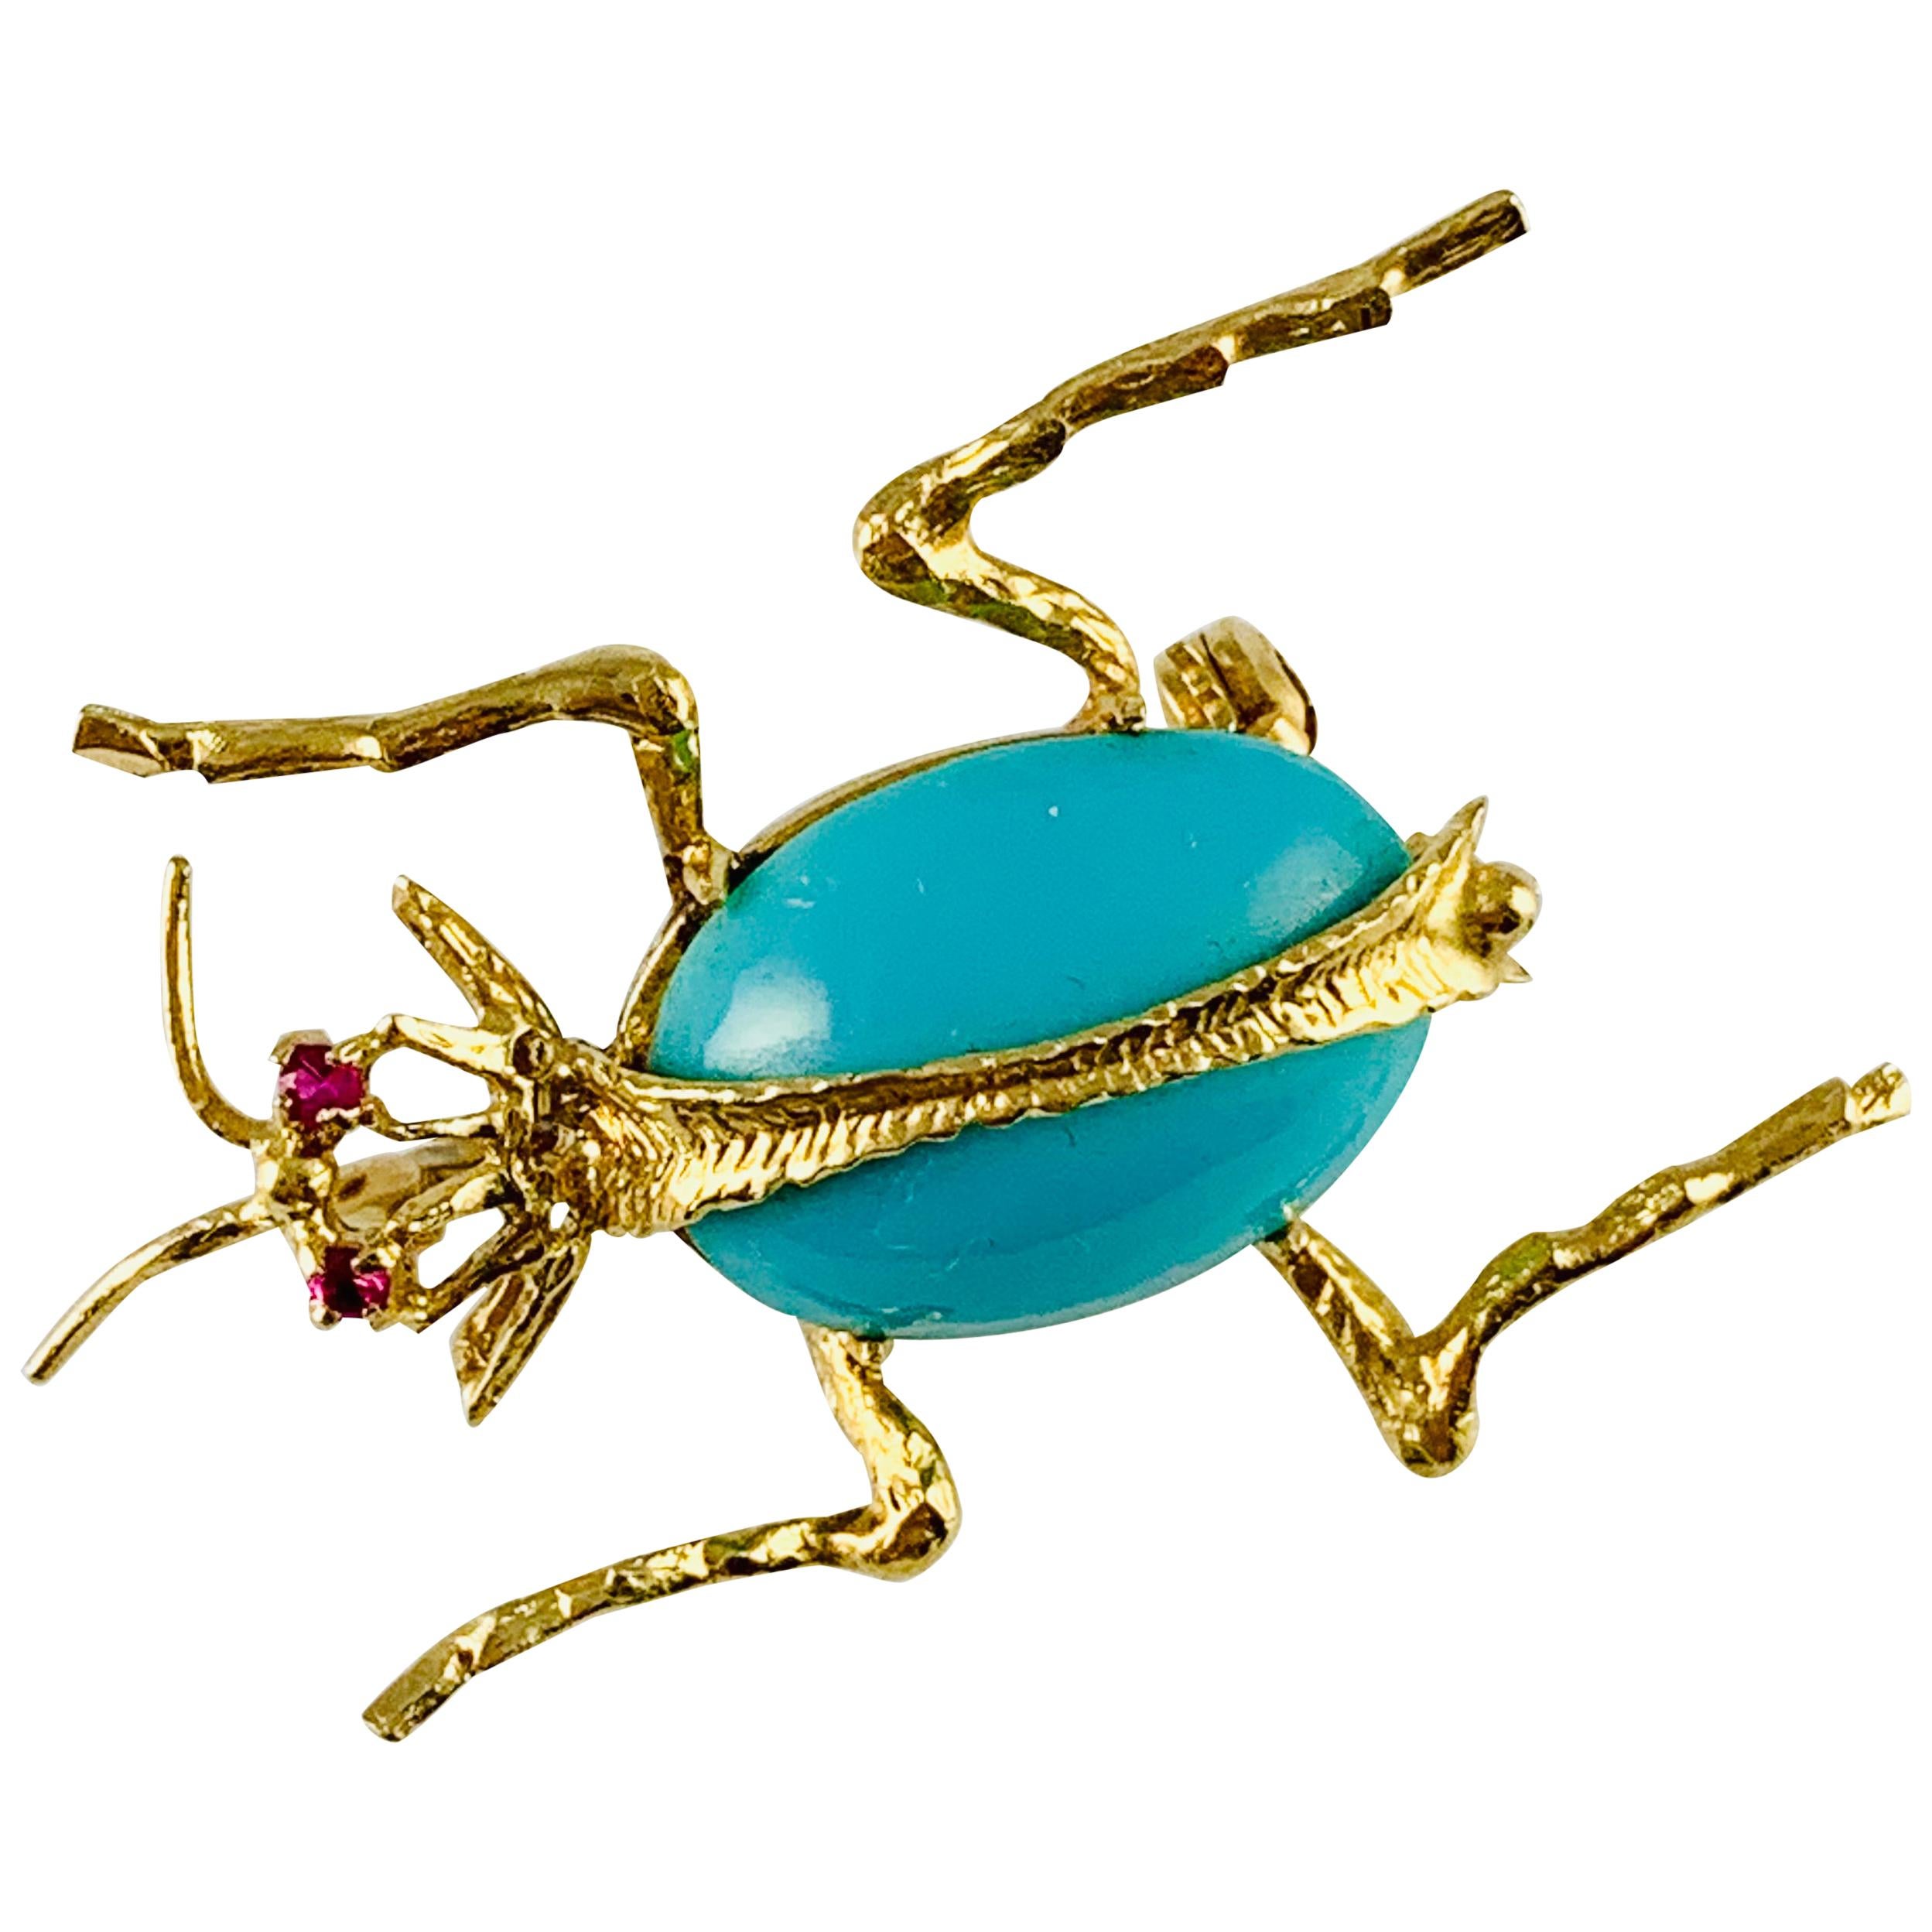 Vintage 18 Karat Yellow Gold Ruby and Turquoise Beetle Brooch or Pin